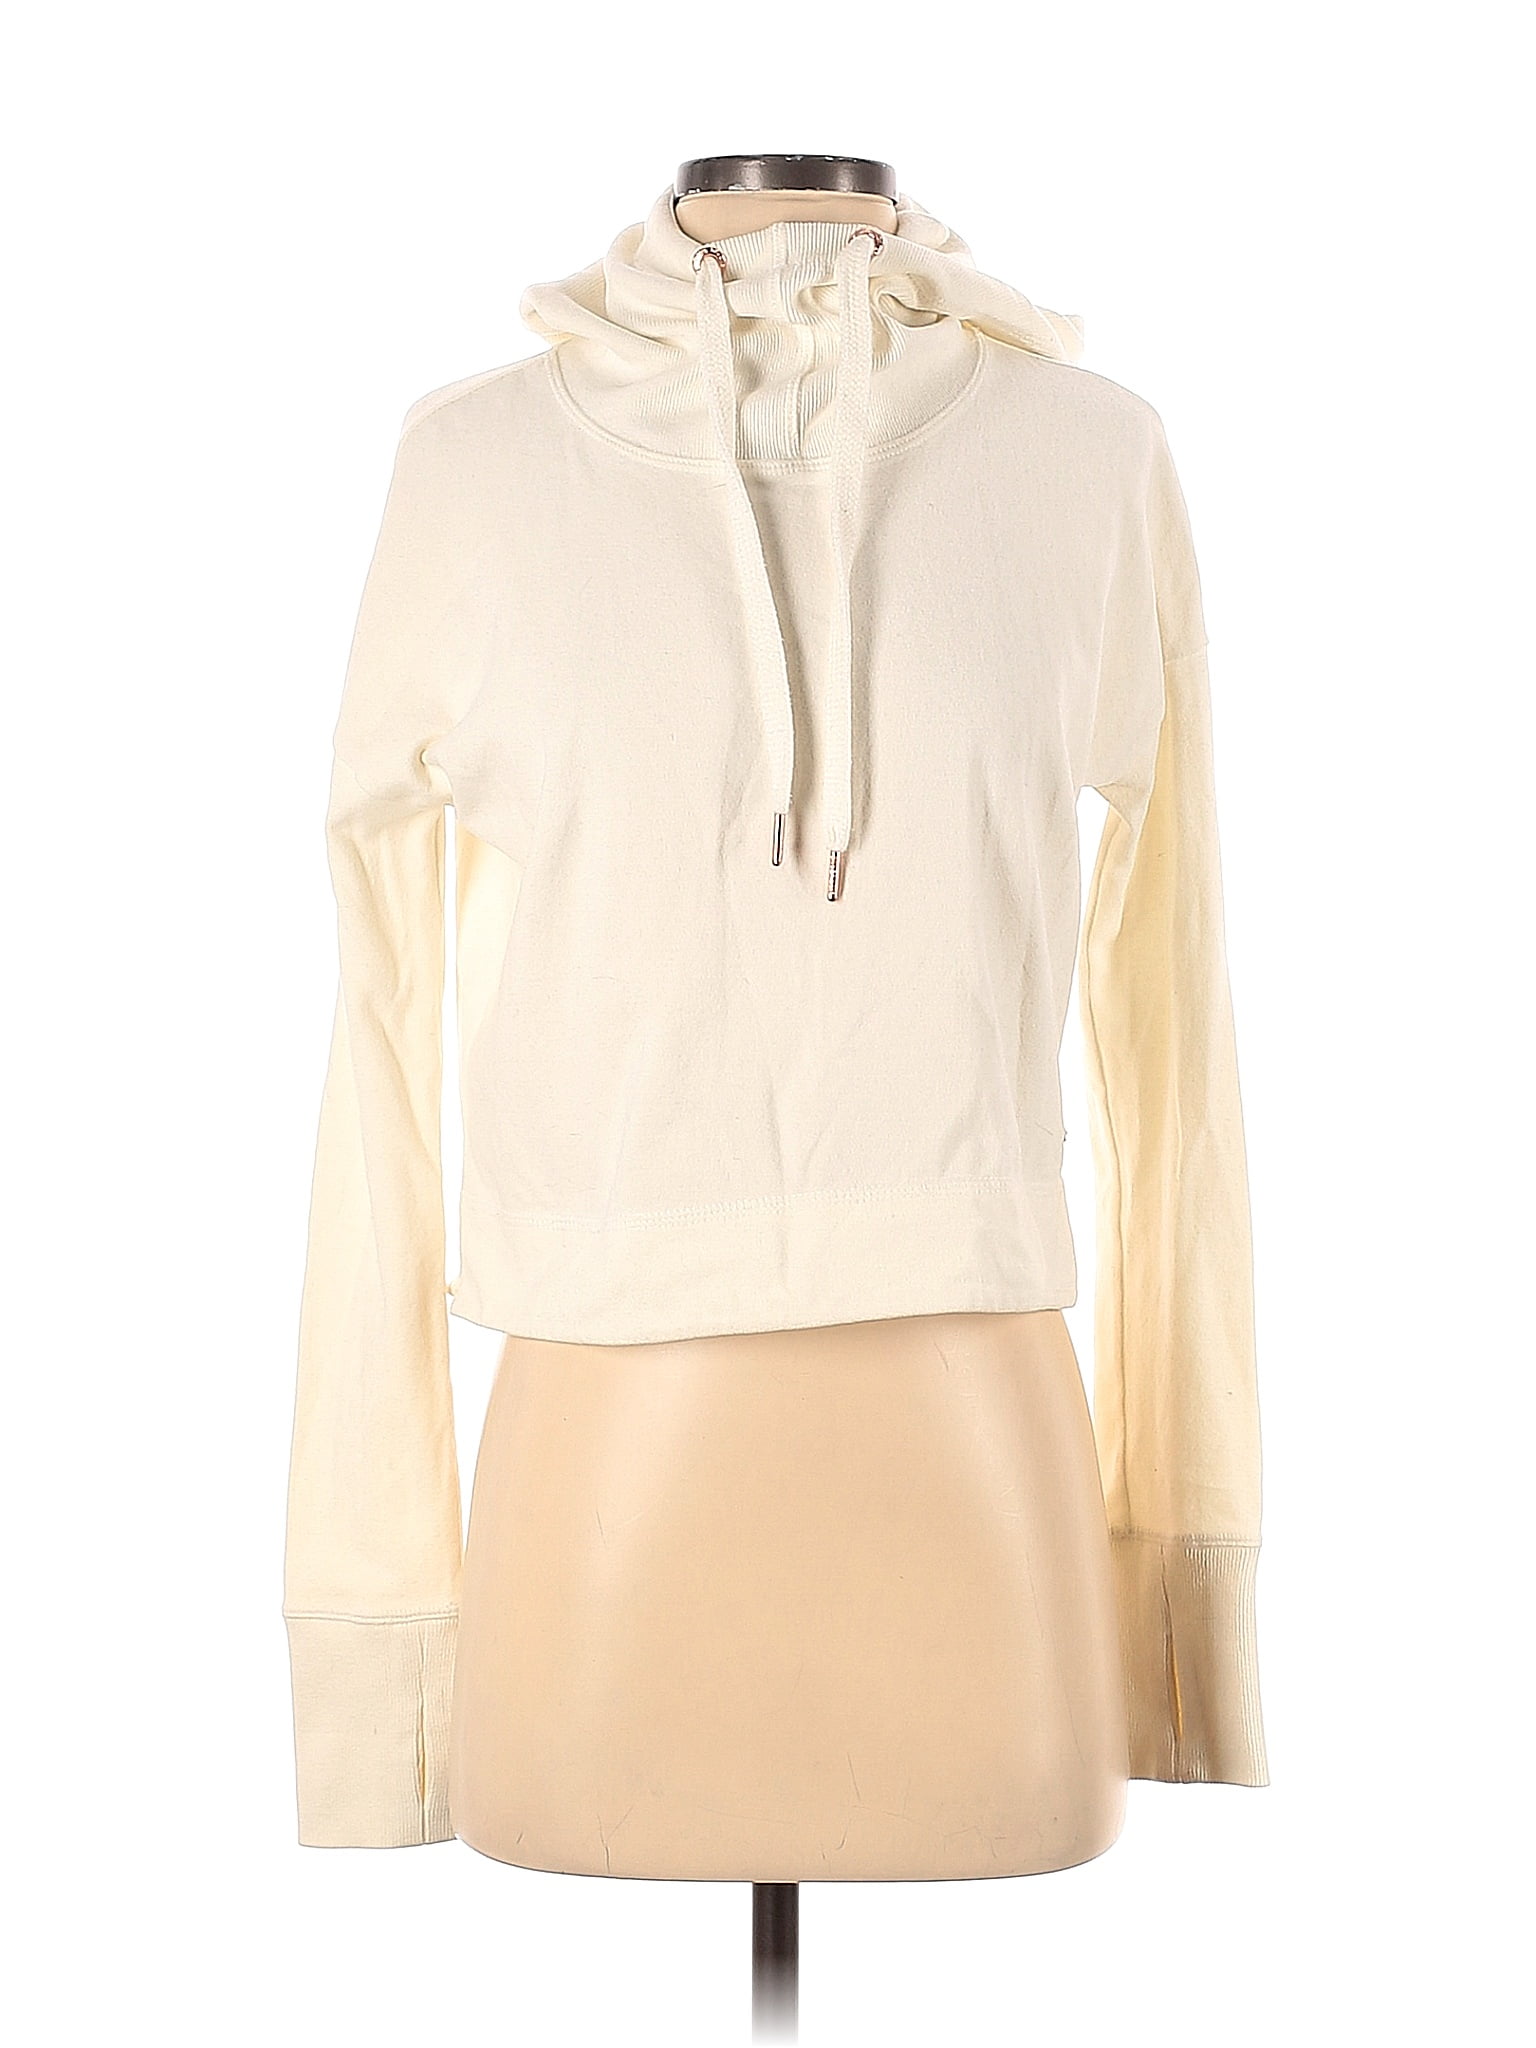 Sweaty Betty Ivory Pullover Hoodie Size XS - 71% off | thredUP